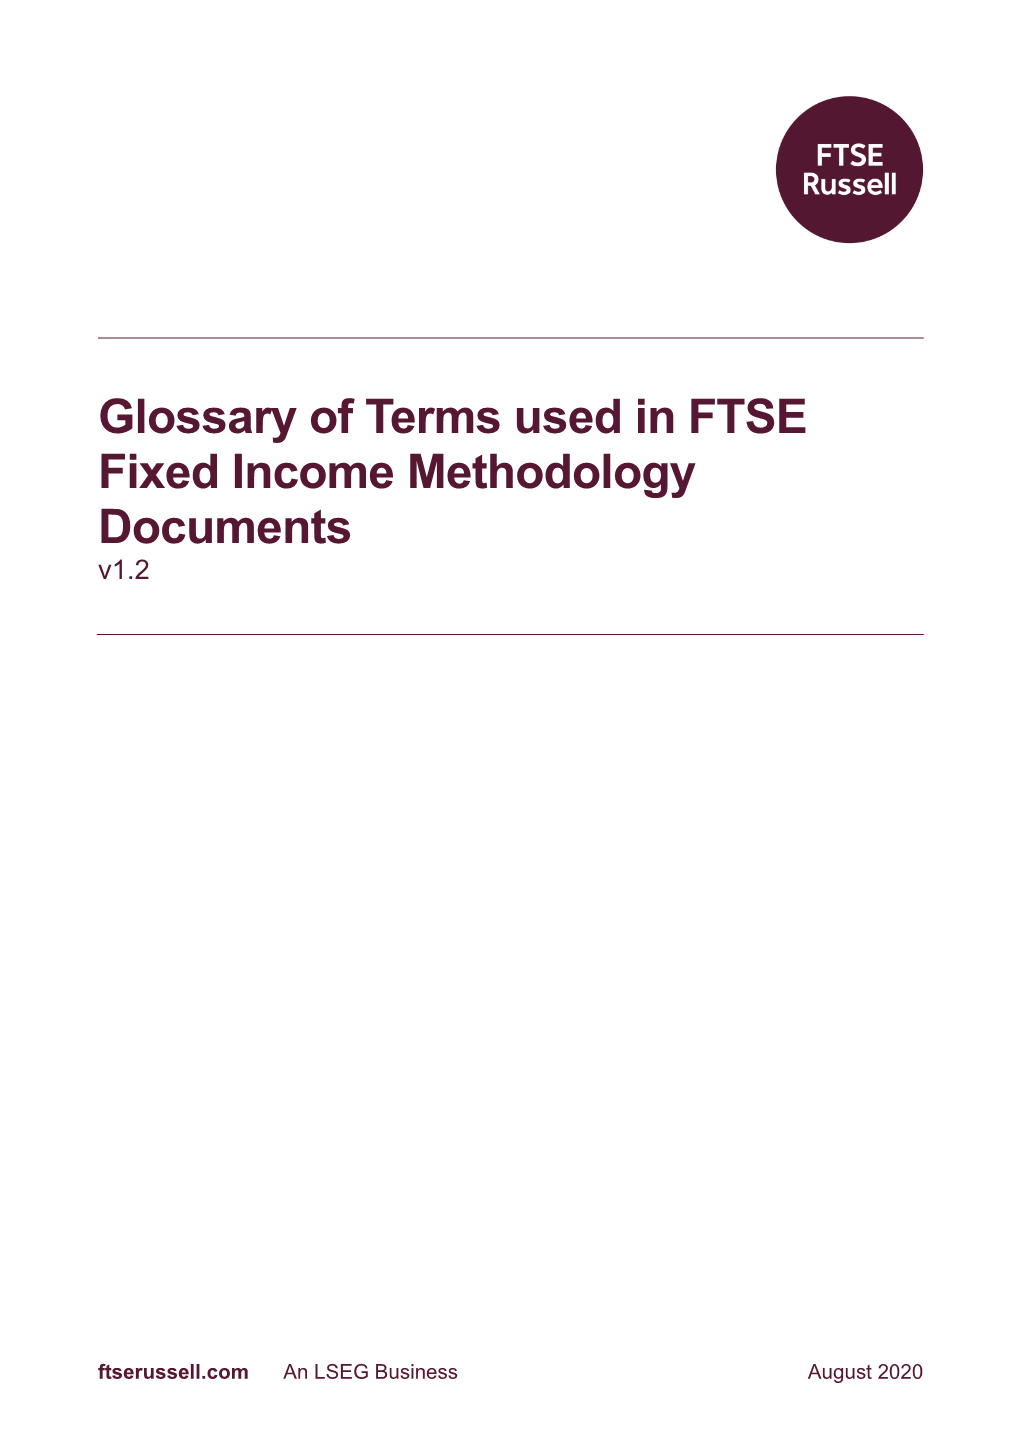 Glossary of Terms Used in FTSE Fixed Income Methodology Documents V1.2